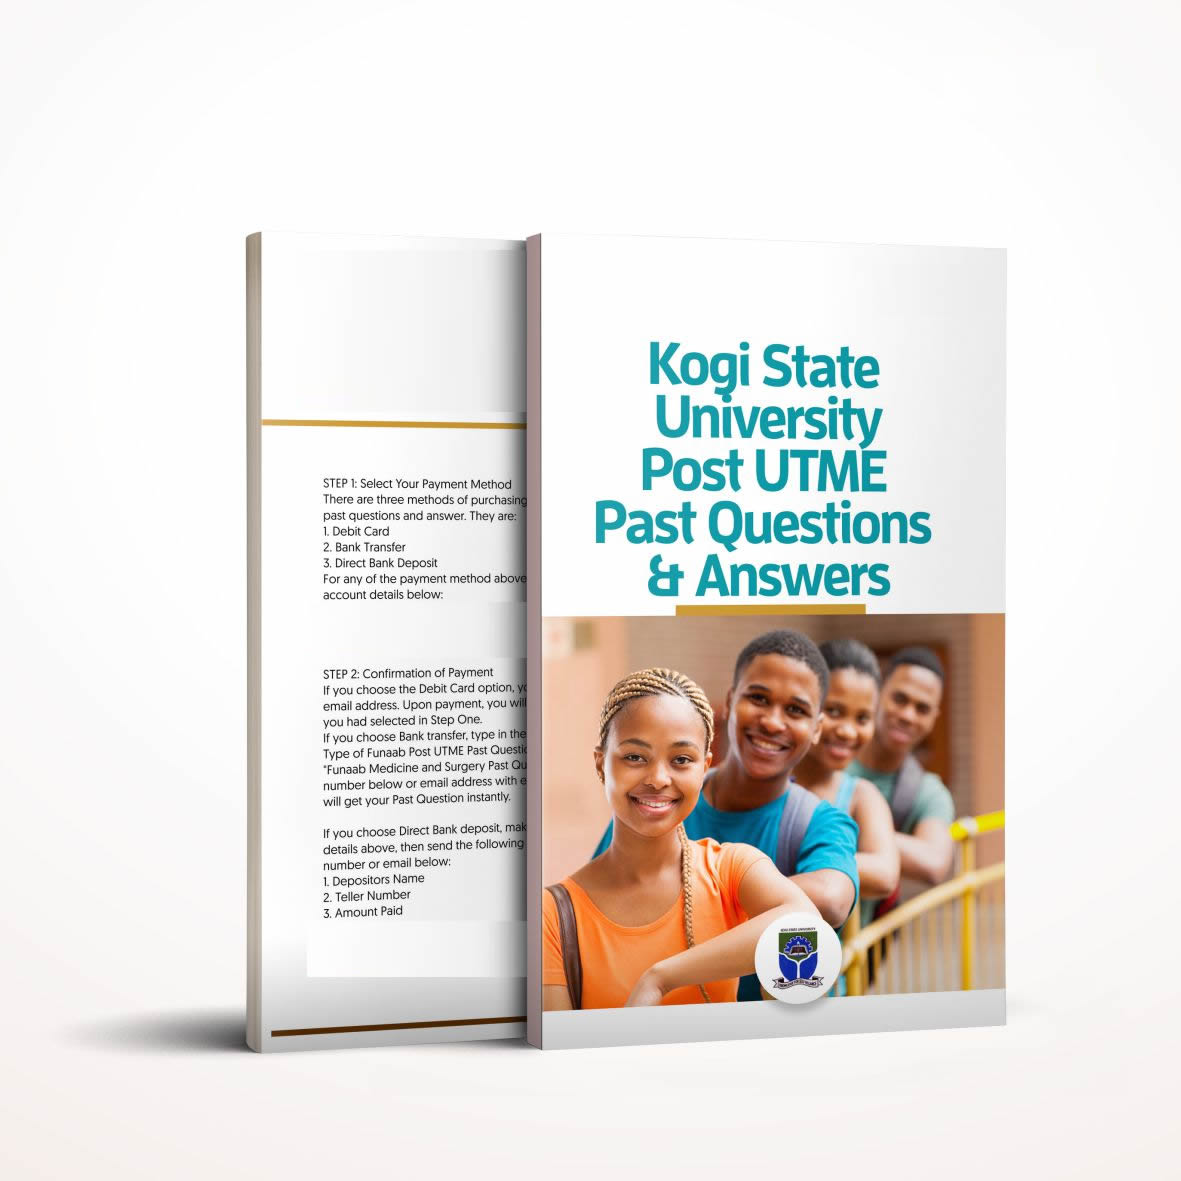 KSU post utme past questions and answers - Pdf